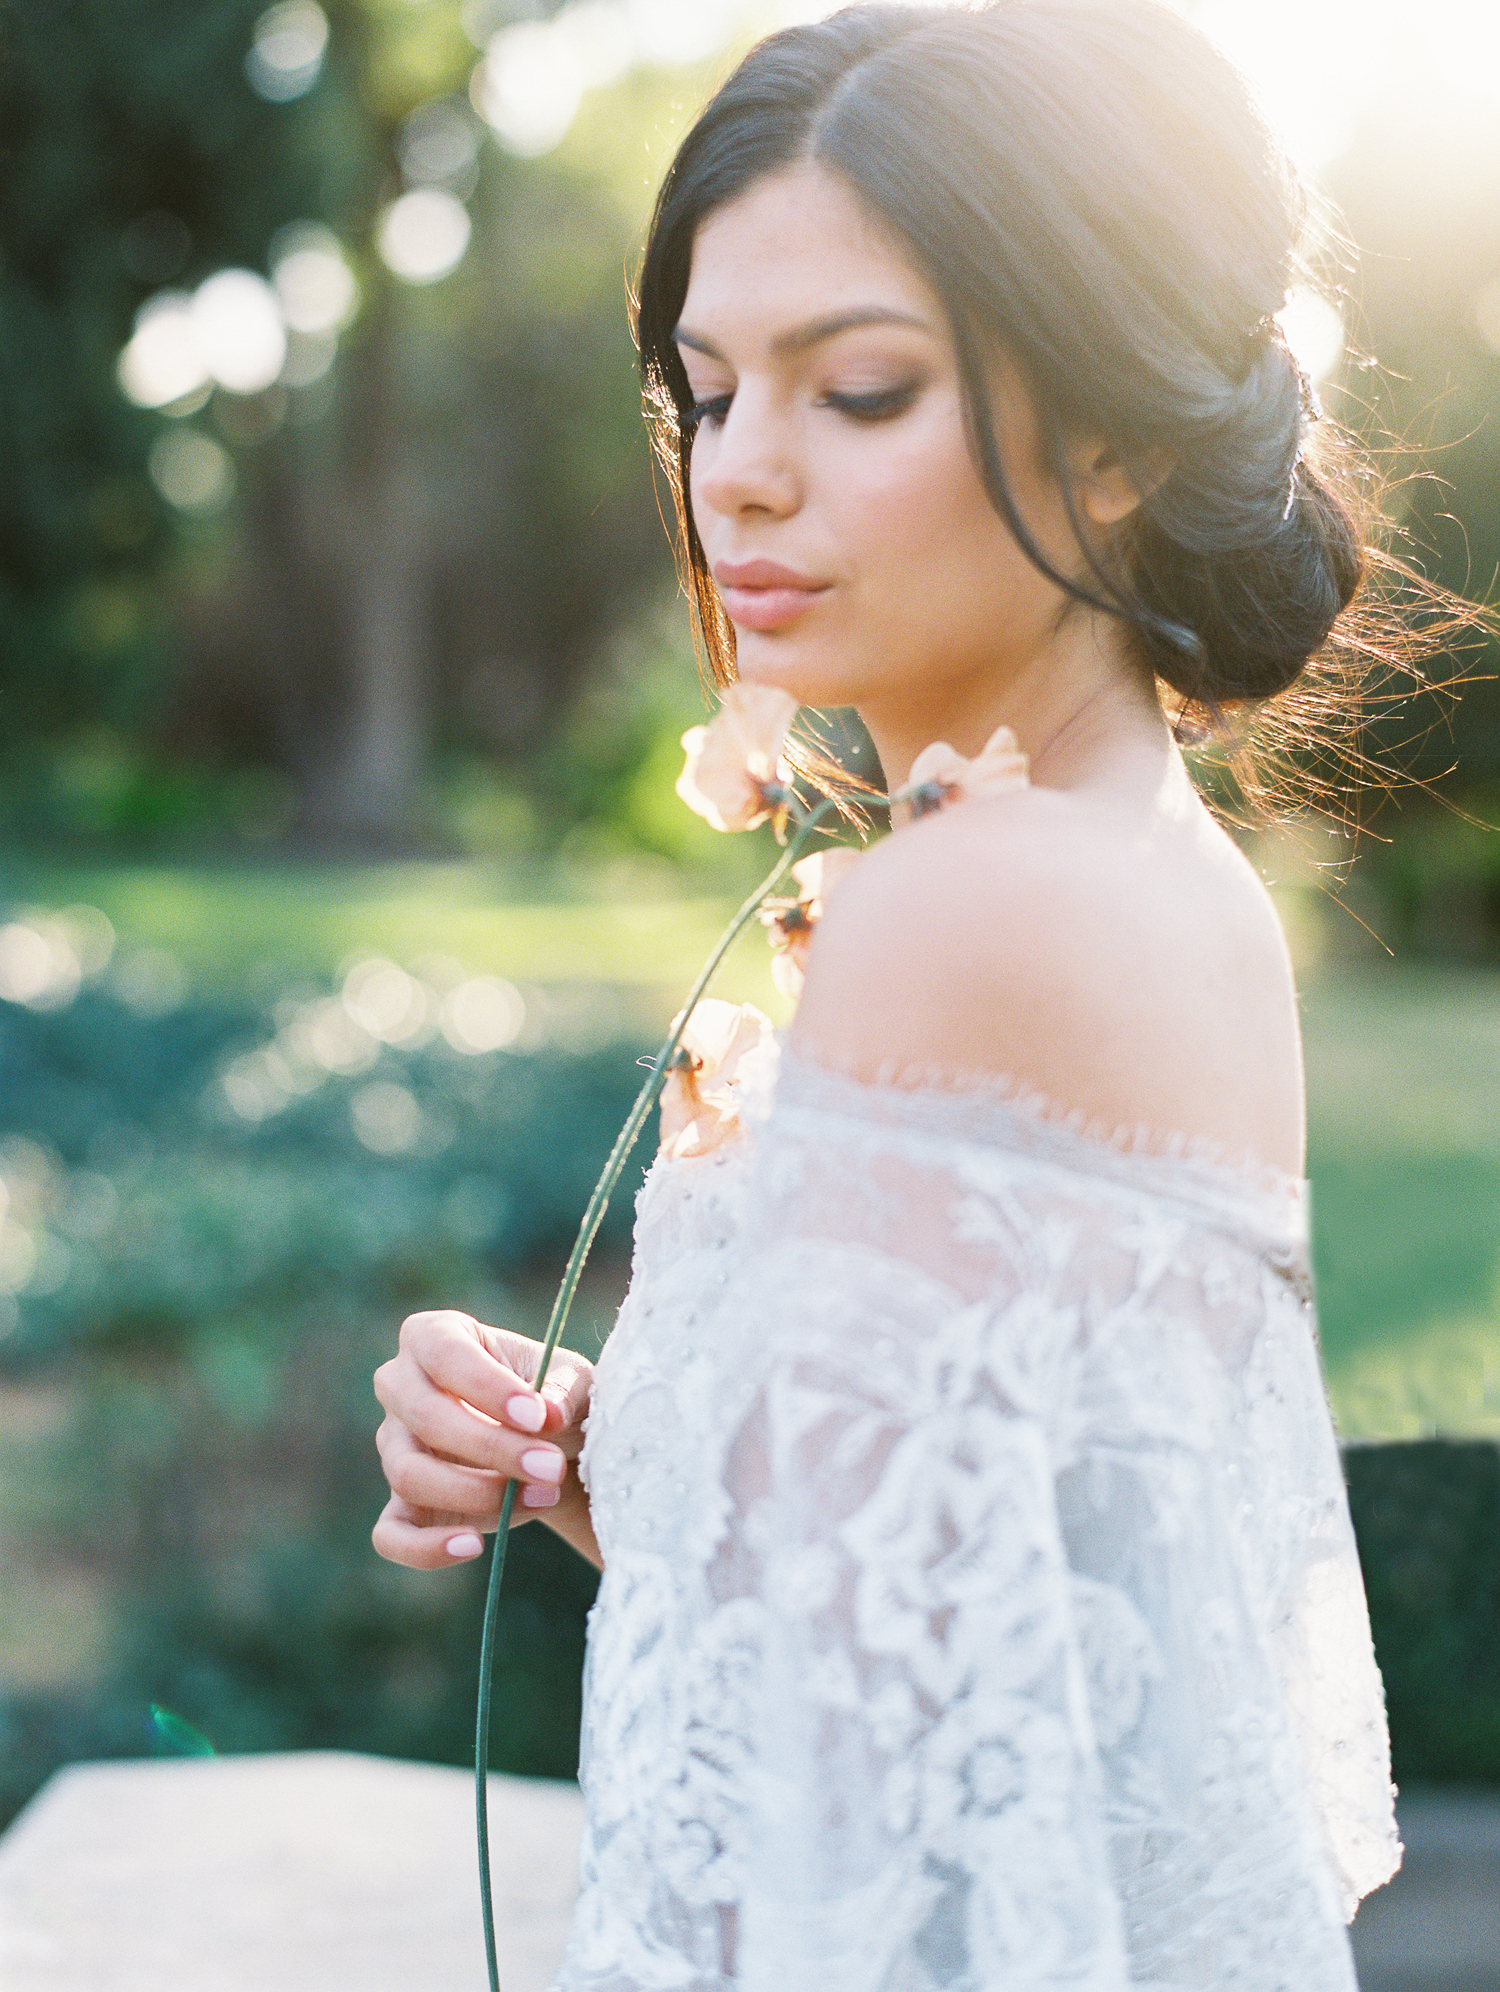 Old World Romantic wedding inspiration in Southern California ...